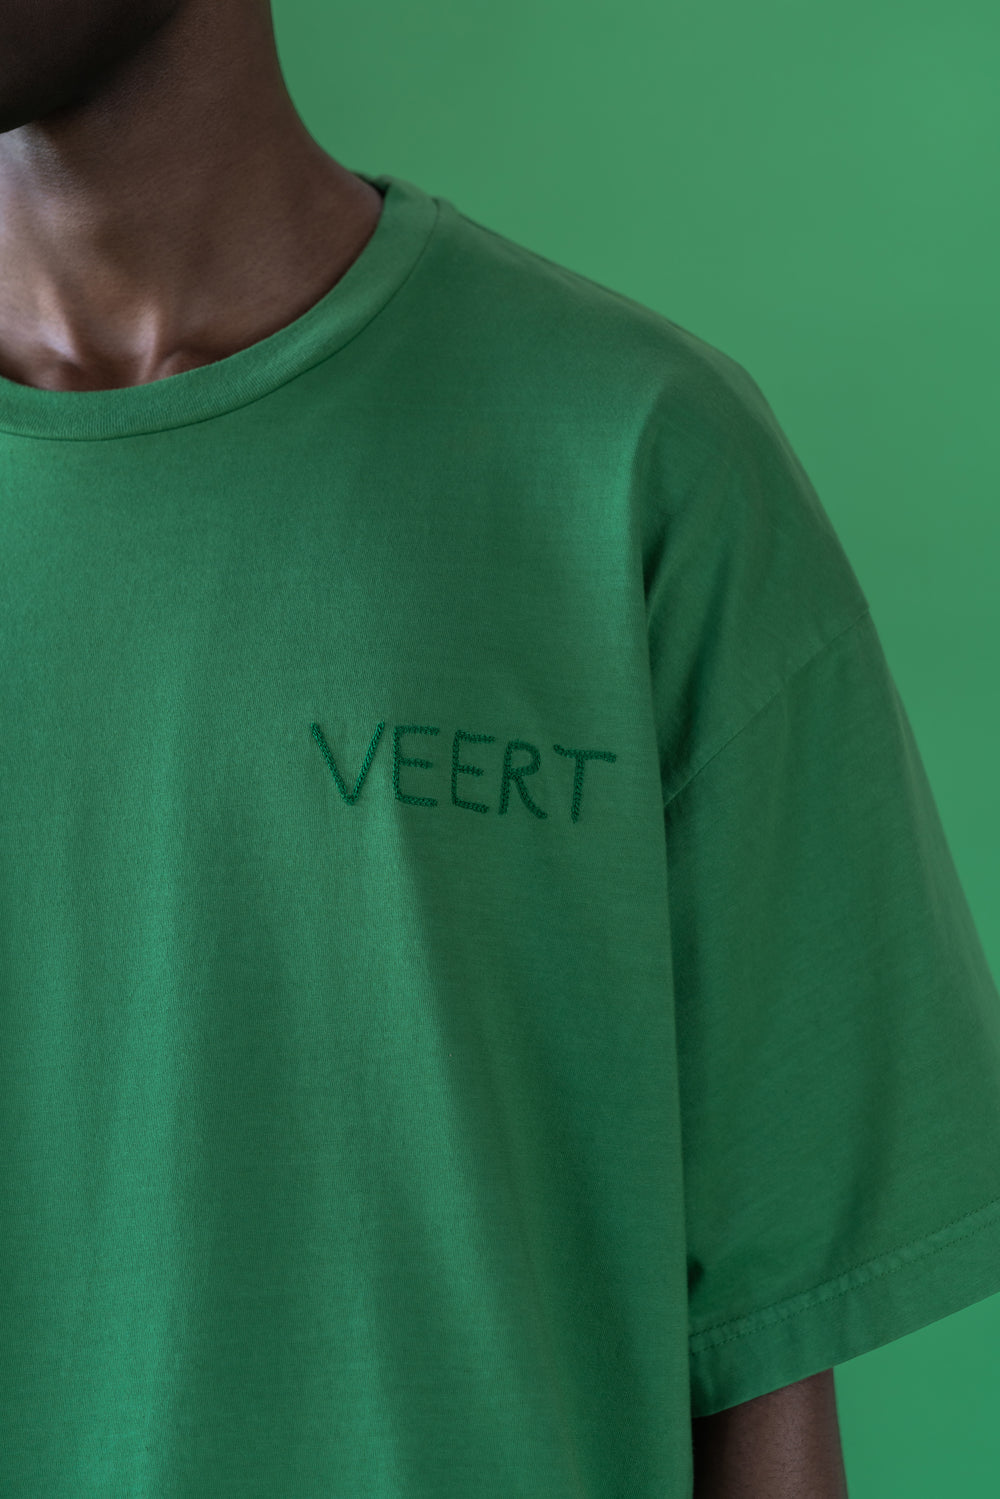 HANDWRITTEN EMBROIDERED T-SHIRT WASHED GREEN